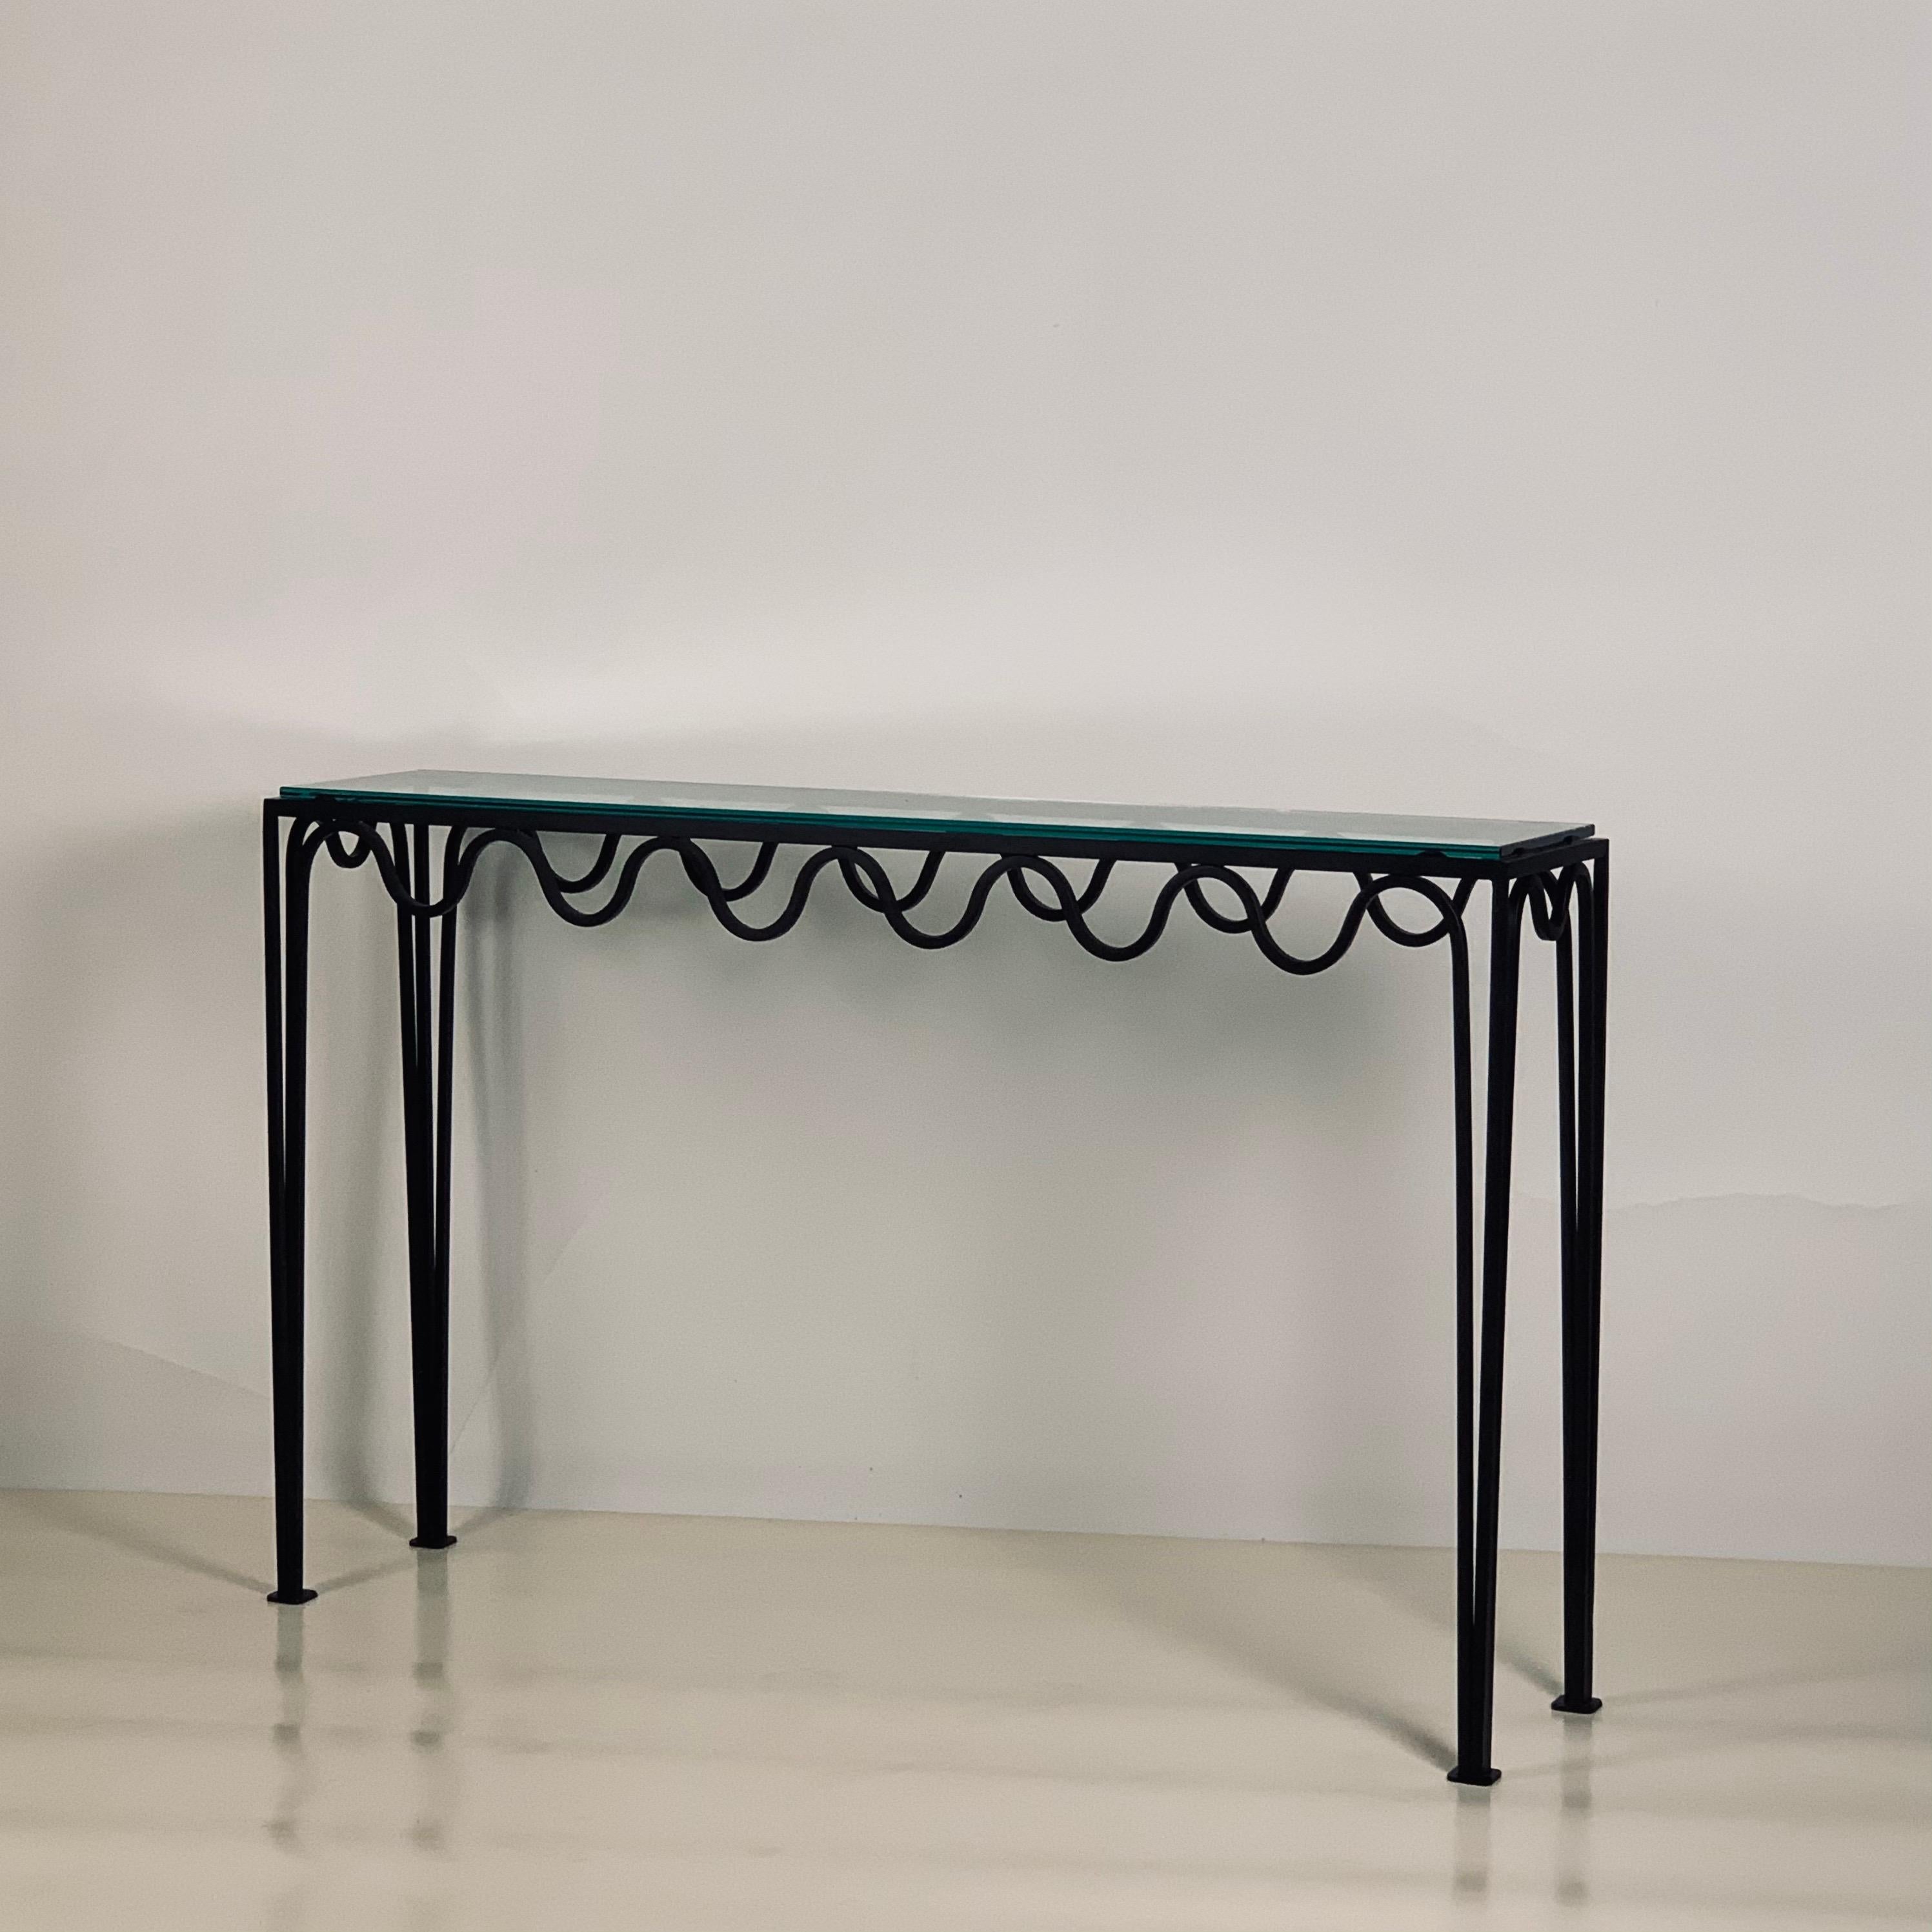 Long undulating 'Méandre' wrought iron and glass console by Design Frères.

Elegant and understated.